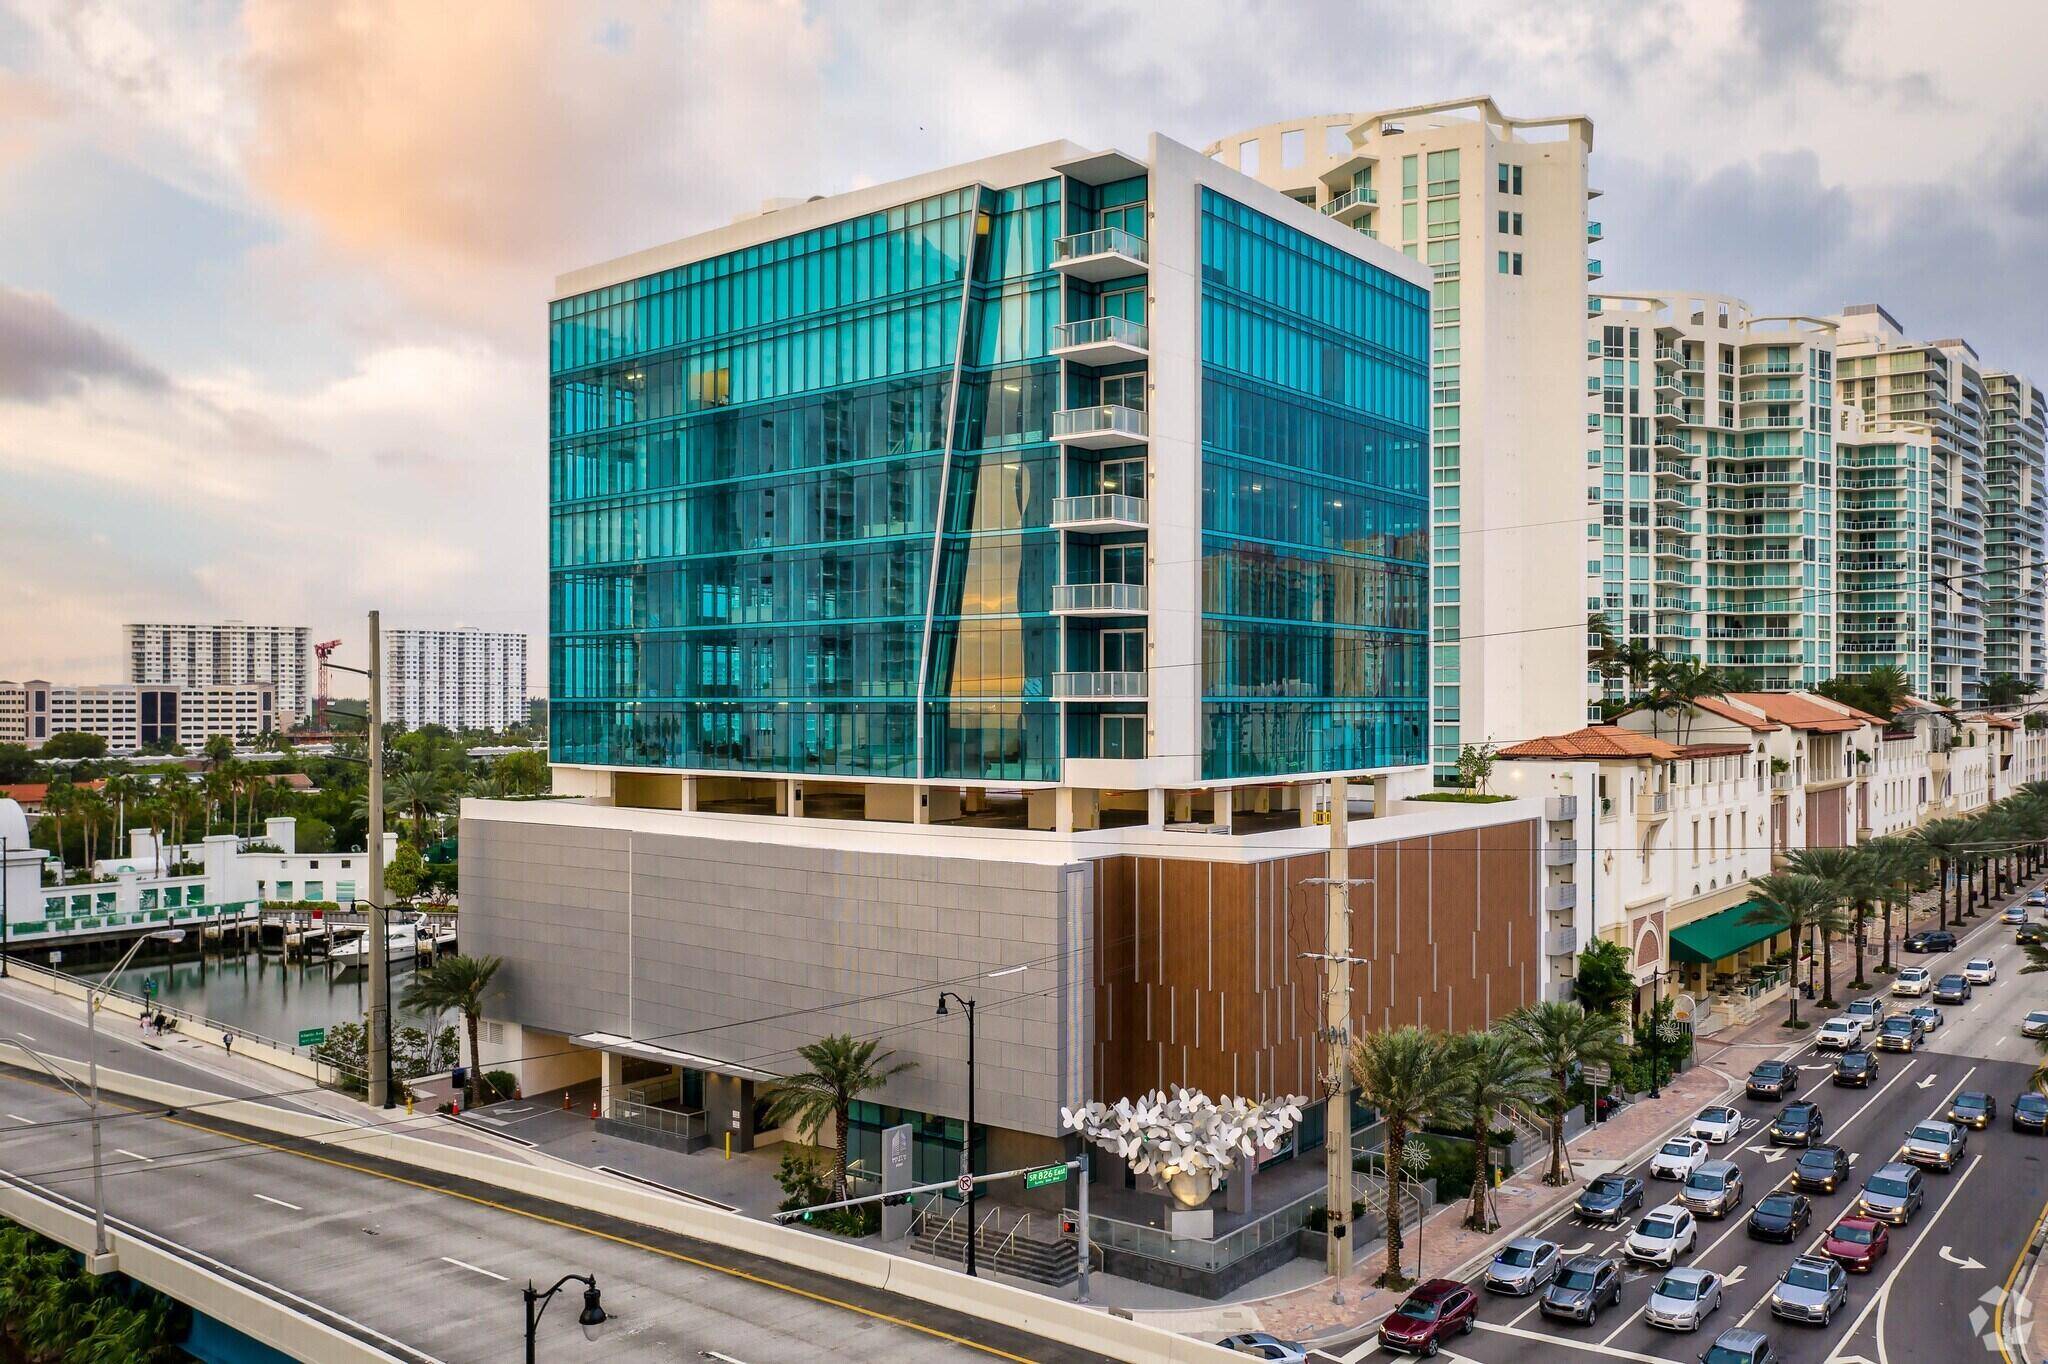 FULL BUILDOUT BRAND NEW UNDER CONSTRACTION WILL BE AVALIBLE STARTING JUNE AUGUST Make office work an enjoyable experience with this office space in Sunny Isles Beach.